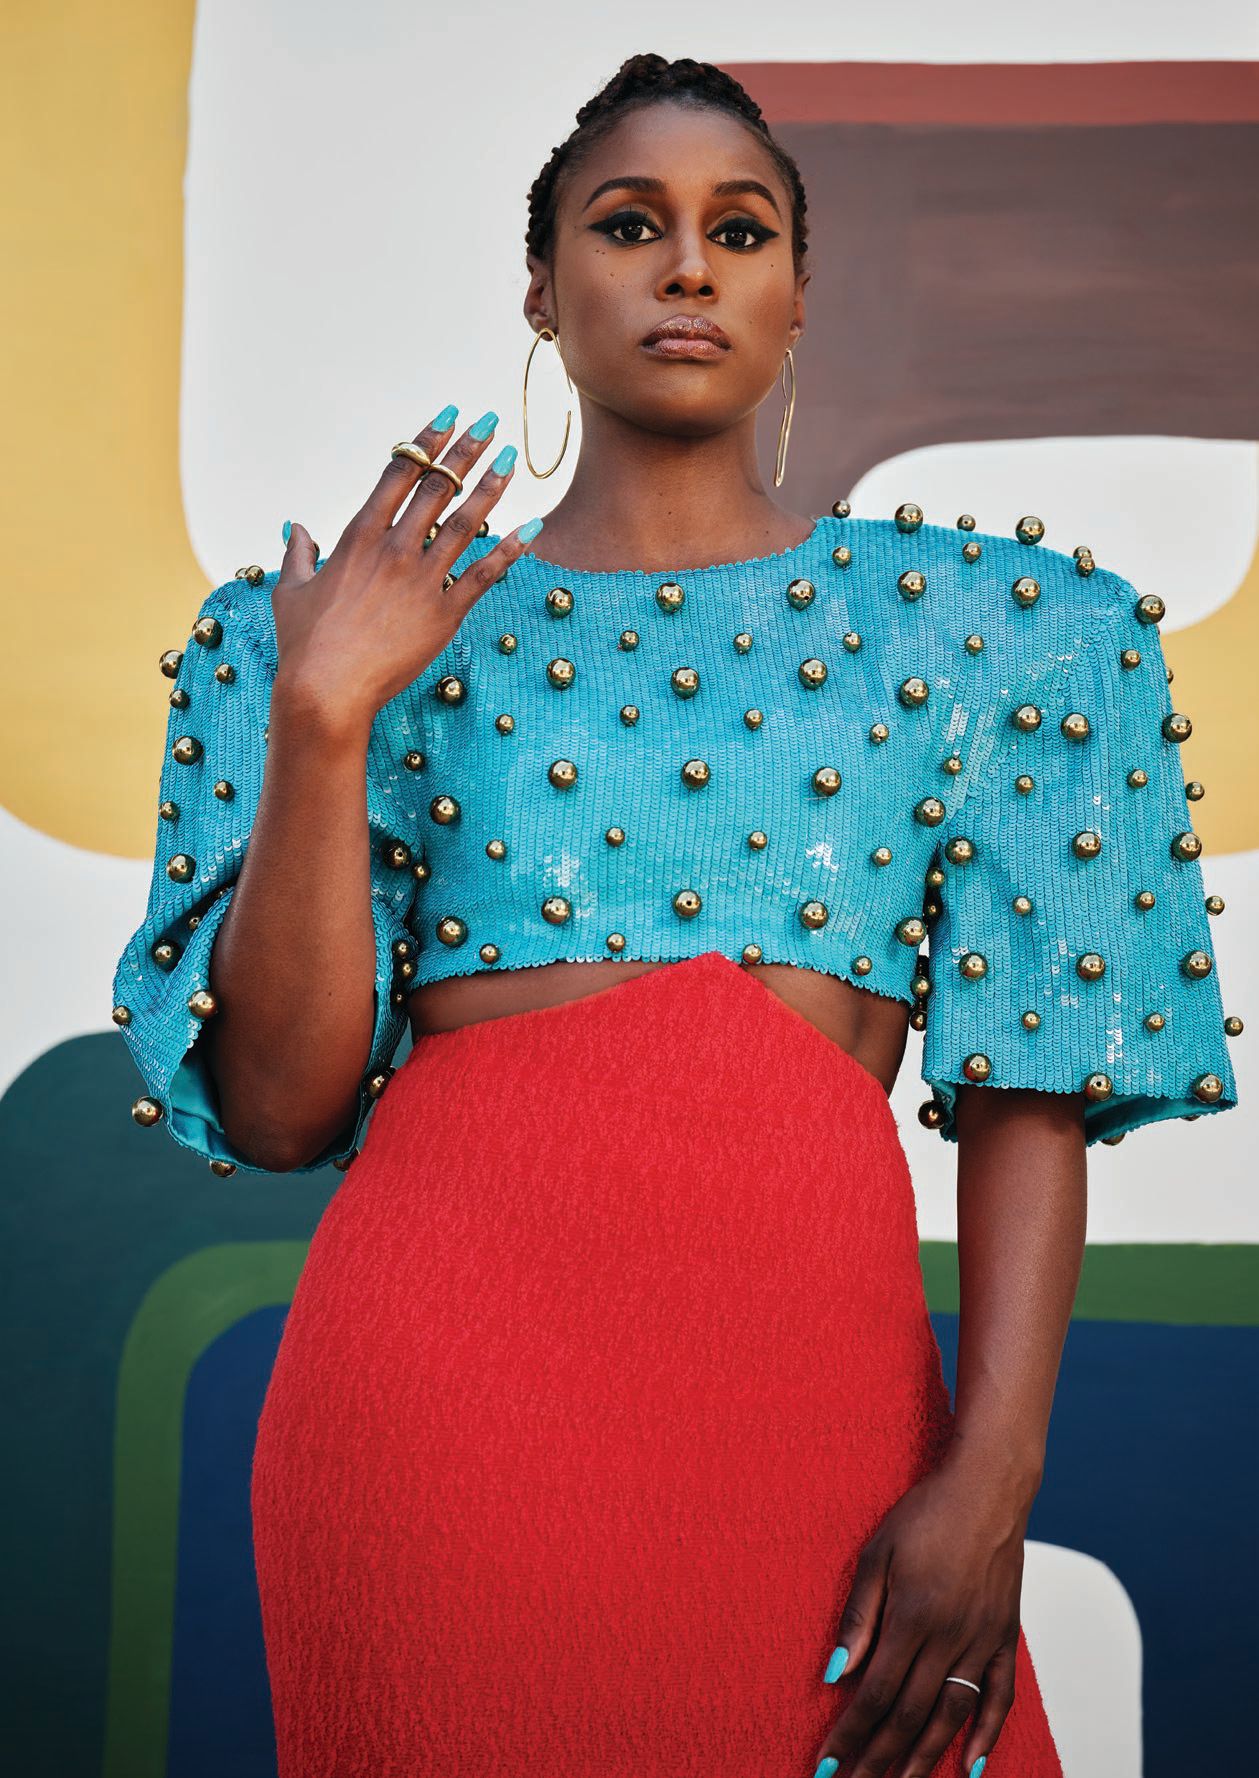 Gucci top and skirt, gucci.com; Khiry earrings and ring, khiry.com; Alexandre Birman heels, alexandrebirman.com. Styling: Jason Rembert Hair: LaRae Burress of Texture Management Inc Makeup: Joanna Simkin at The Wall Group Manicure: Yoko Sakakura at A-Frame Agency using OPI Set Design: Sam Jaspersohn at See Management Gaffer: Jason Beck Location: 10102 Angelo View Drive, Beverly Hills, Calif., designed by Disco Volante, listed with The Beverly Hills Estates Photographed by JD Barnes Styled by Jason Rembert